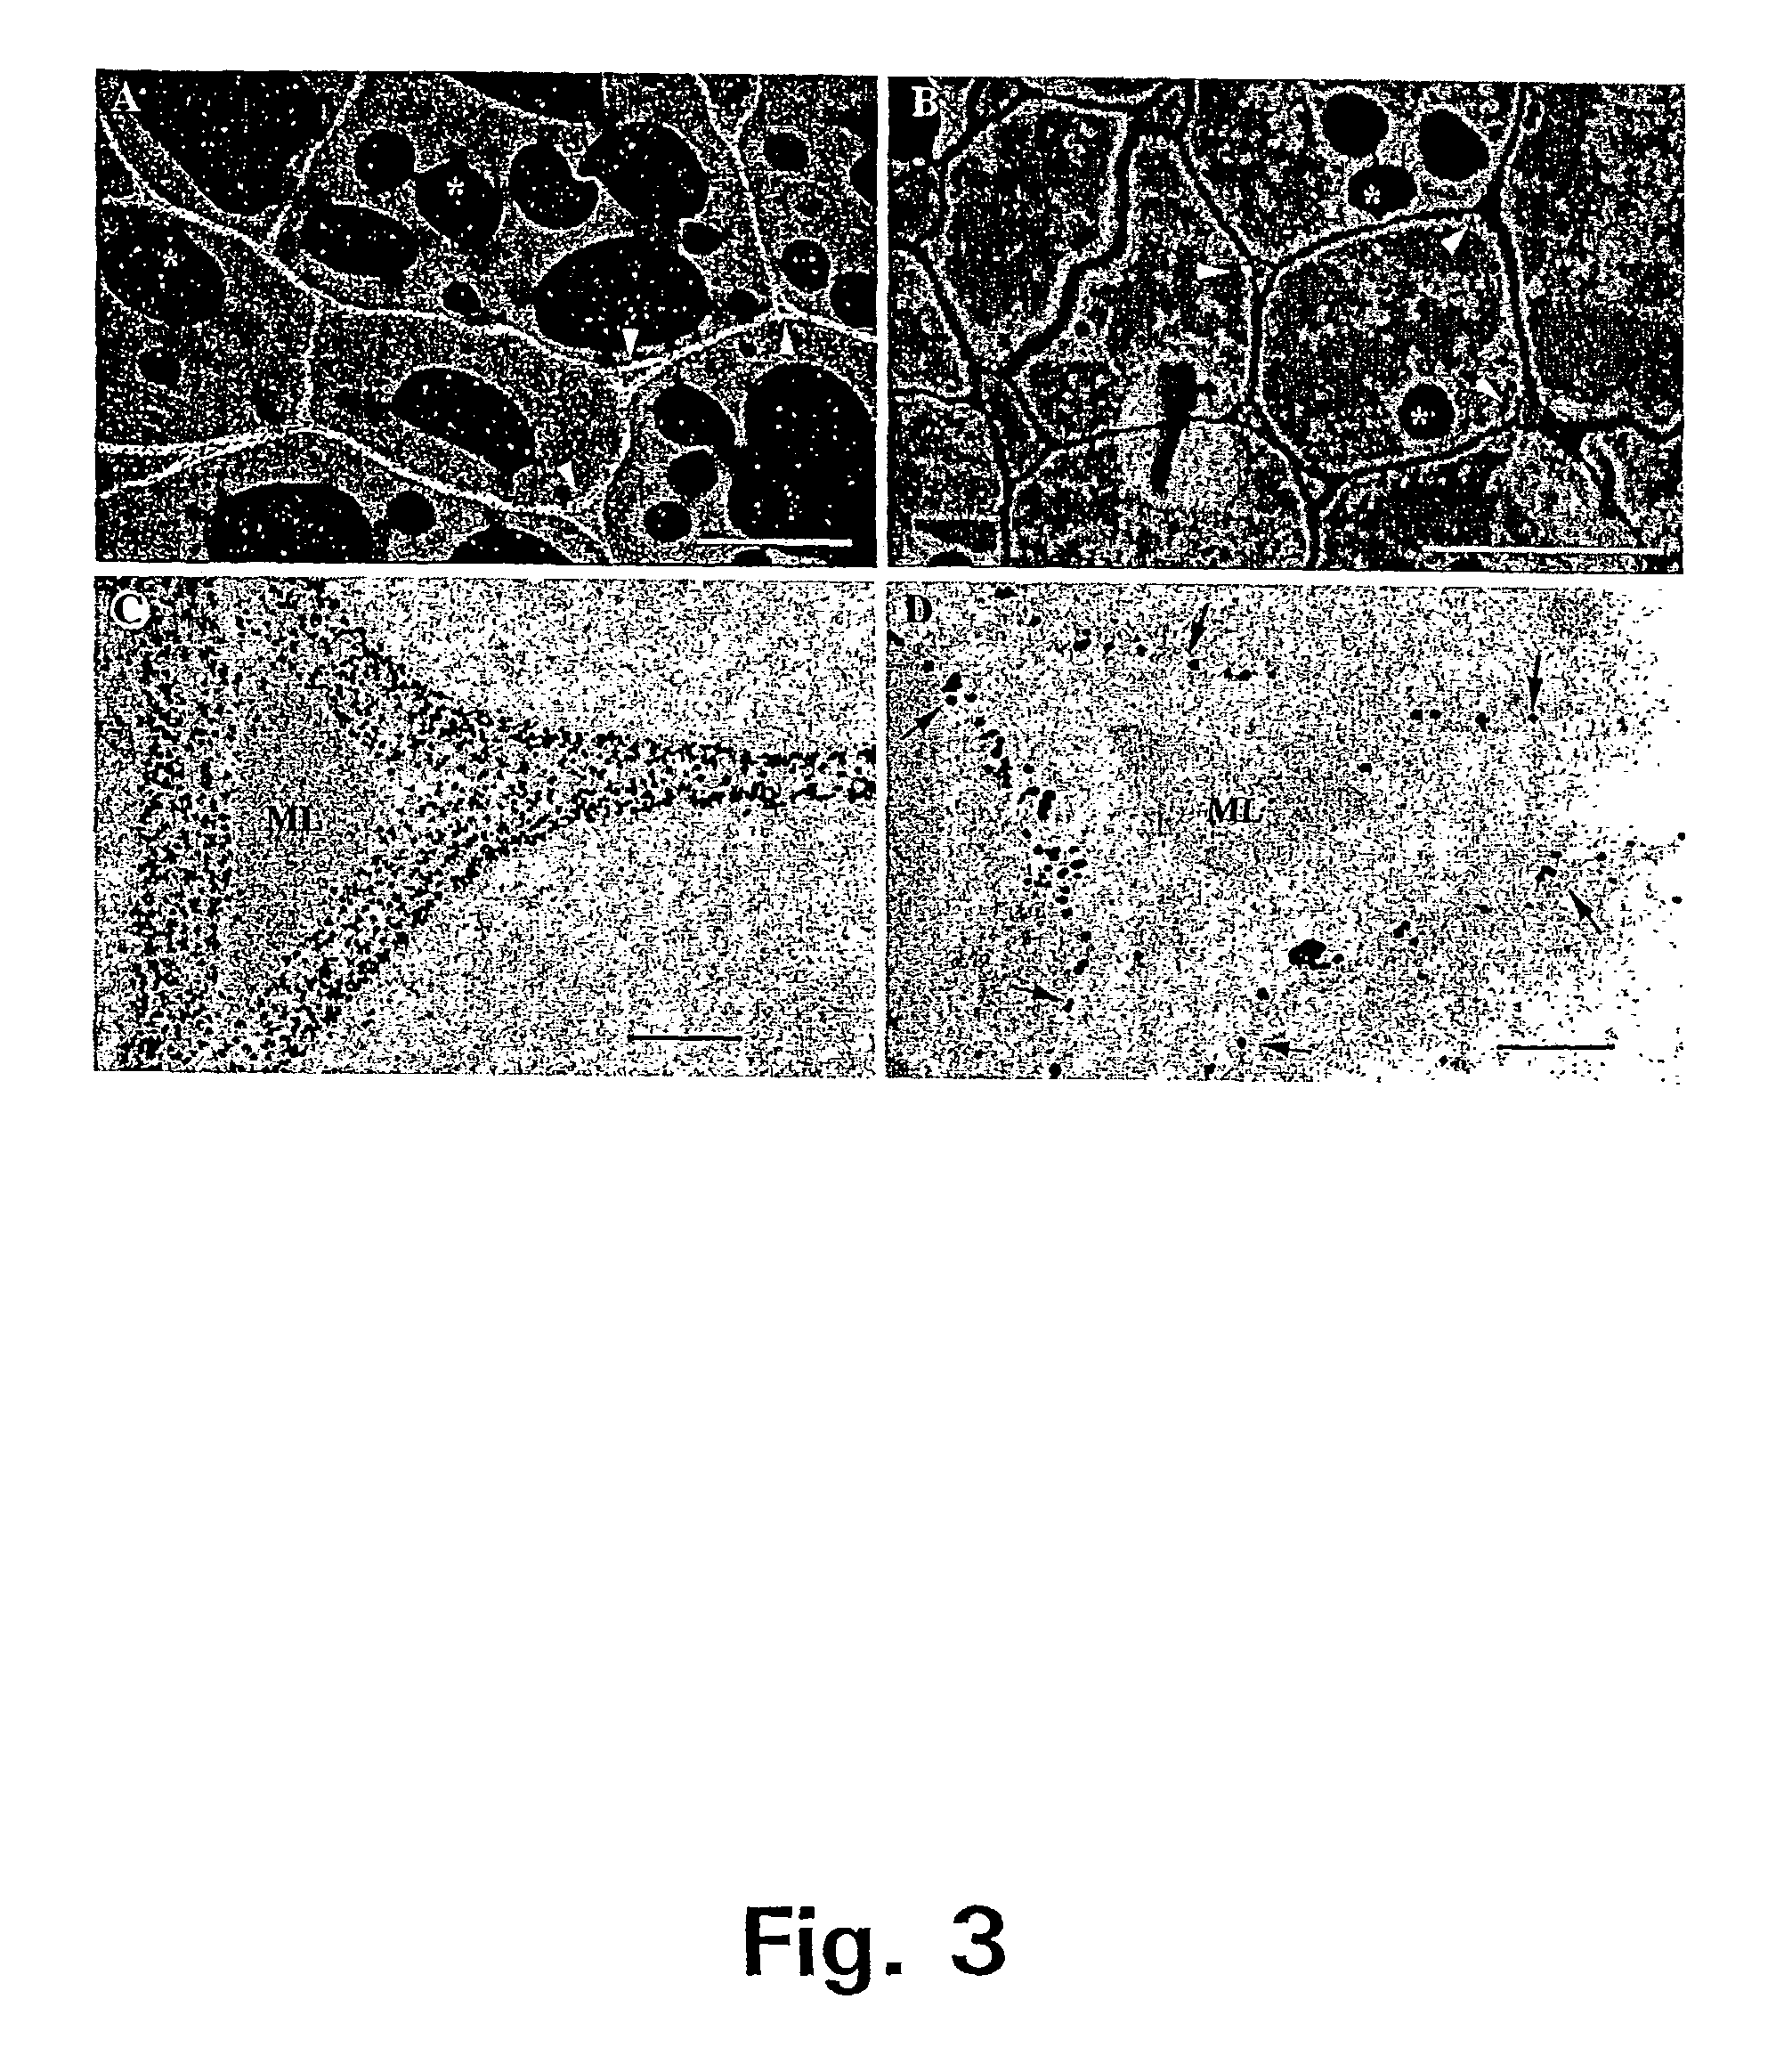 Method for remodelling cell wall polysaccharide structures in plants